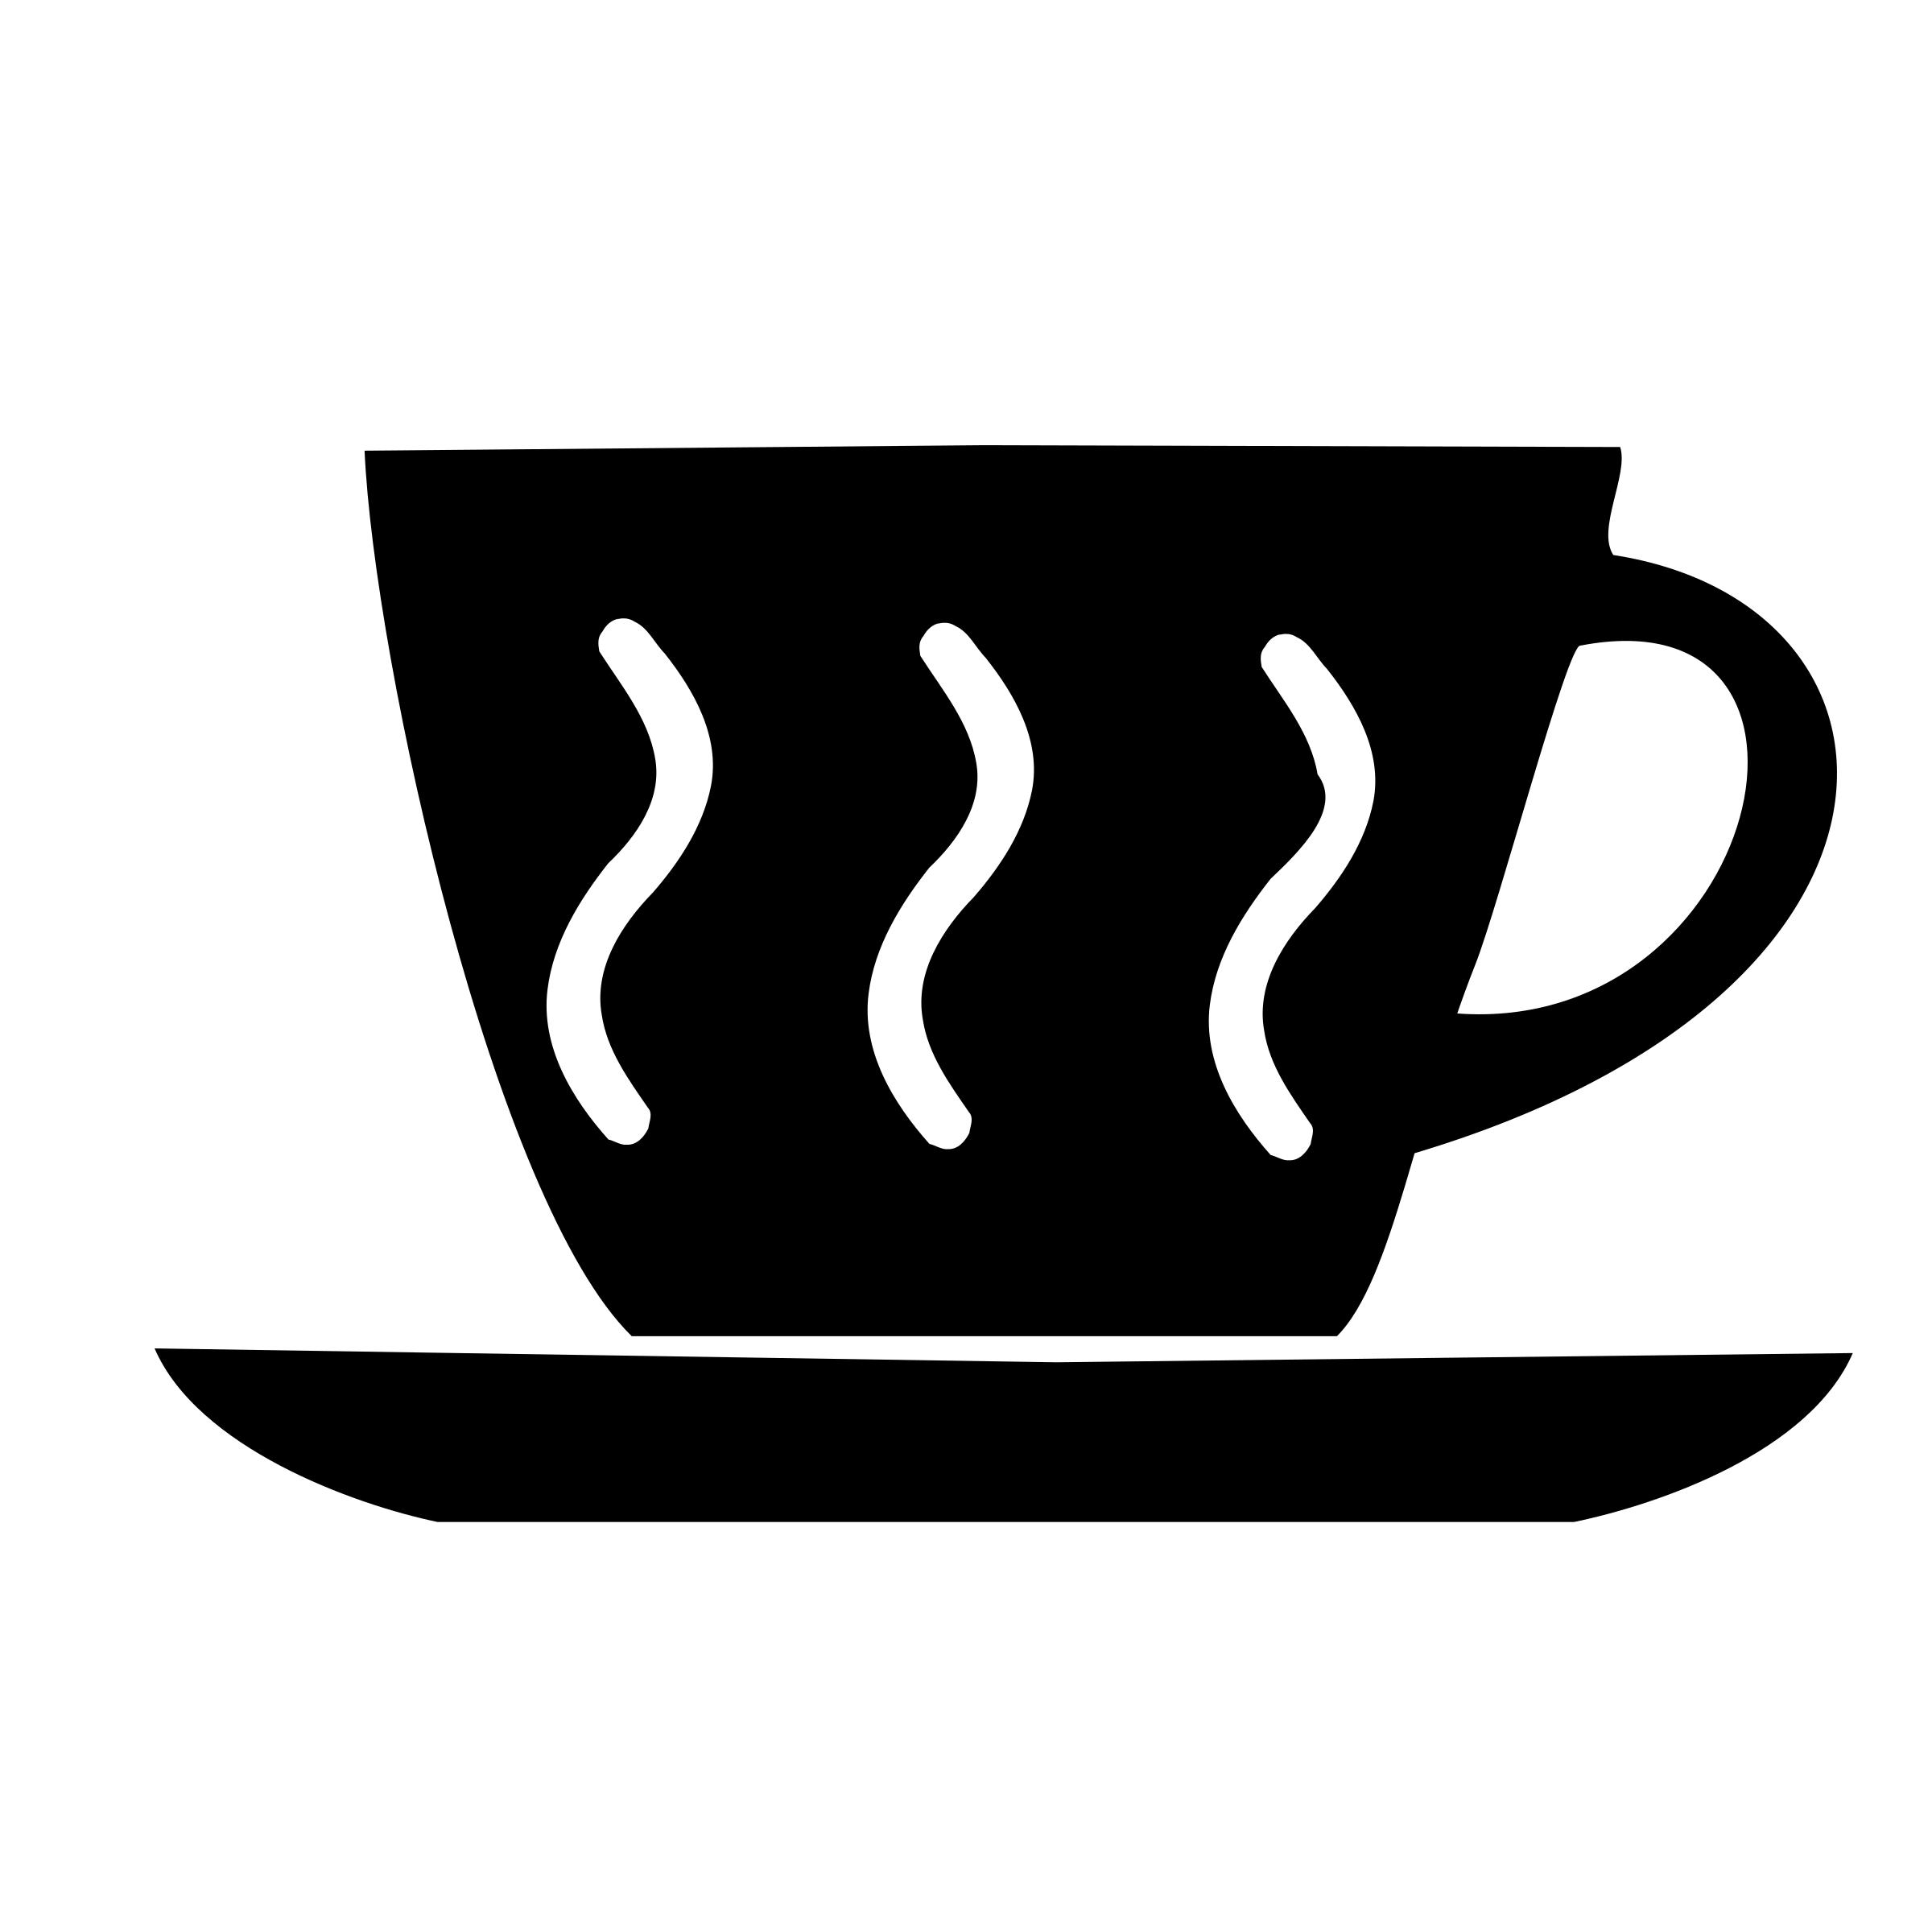 Morphing coffee SMIL animation icons